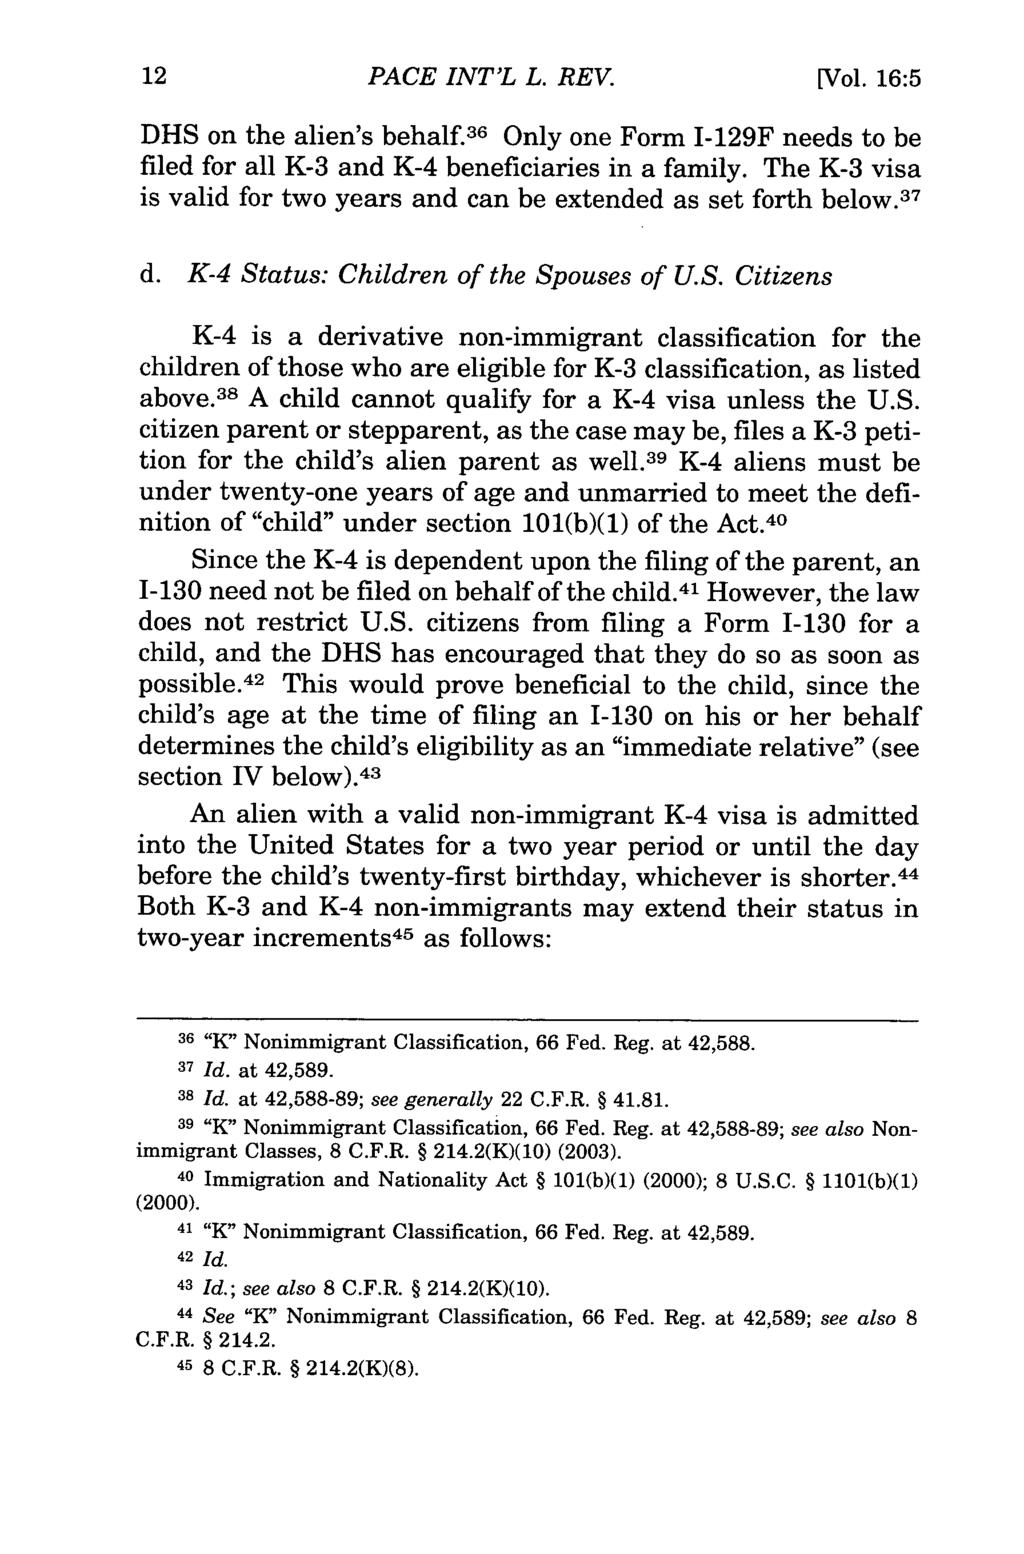 PACE INTL L. REV. [Vol. 16:5 DHS on the alien's behalf. 36 Only one Form I-129F needs to be filed for all K-3 and K-4 beneficiaries in a family.